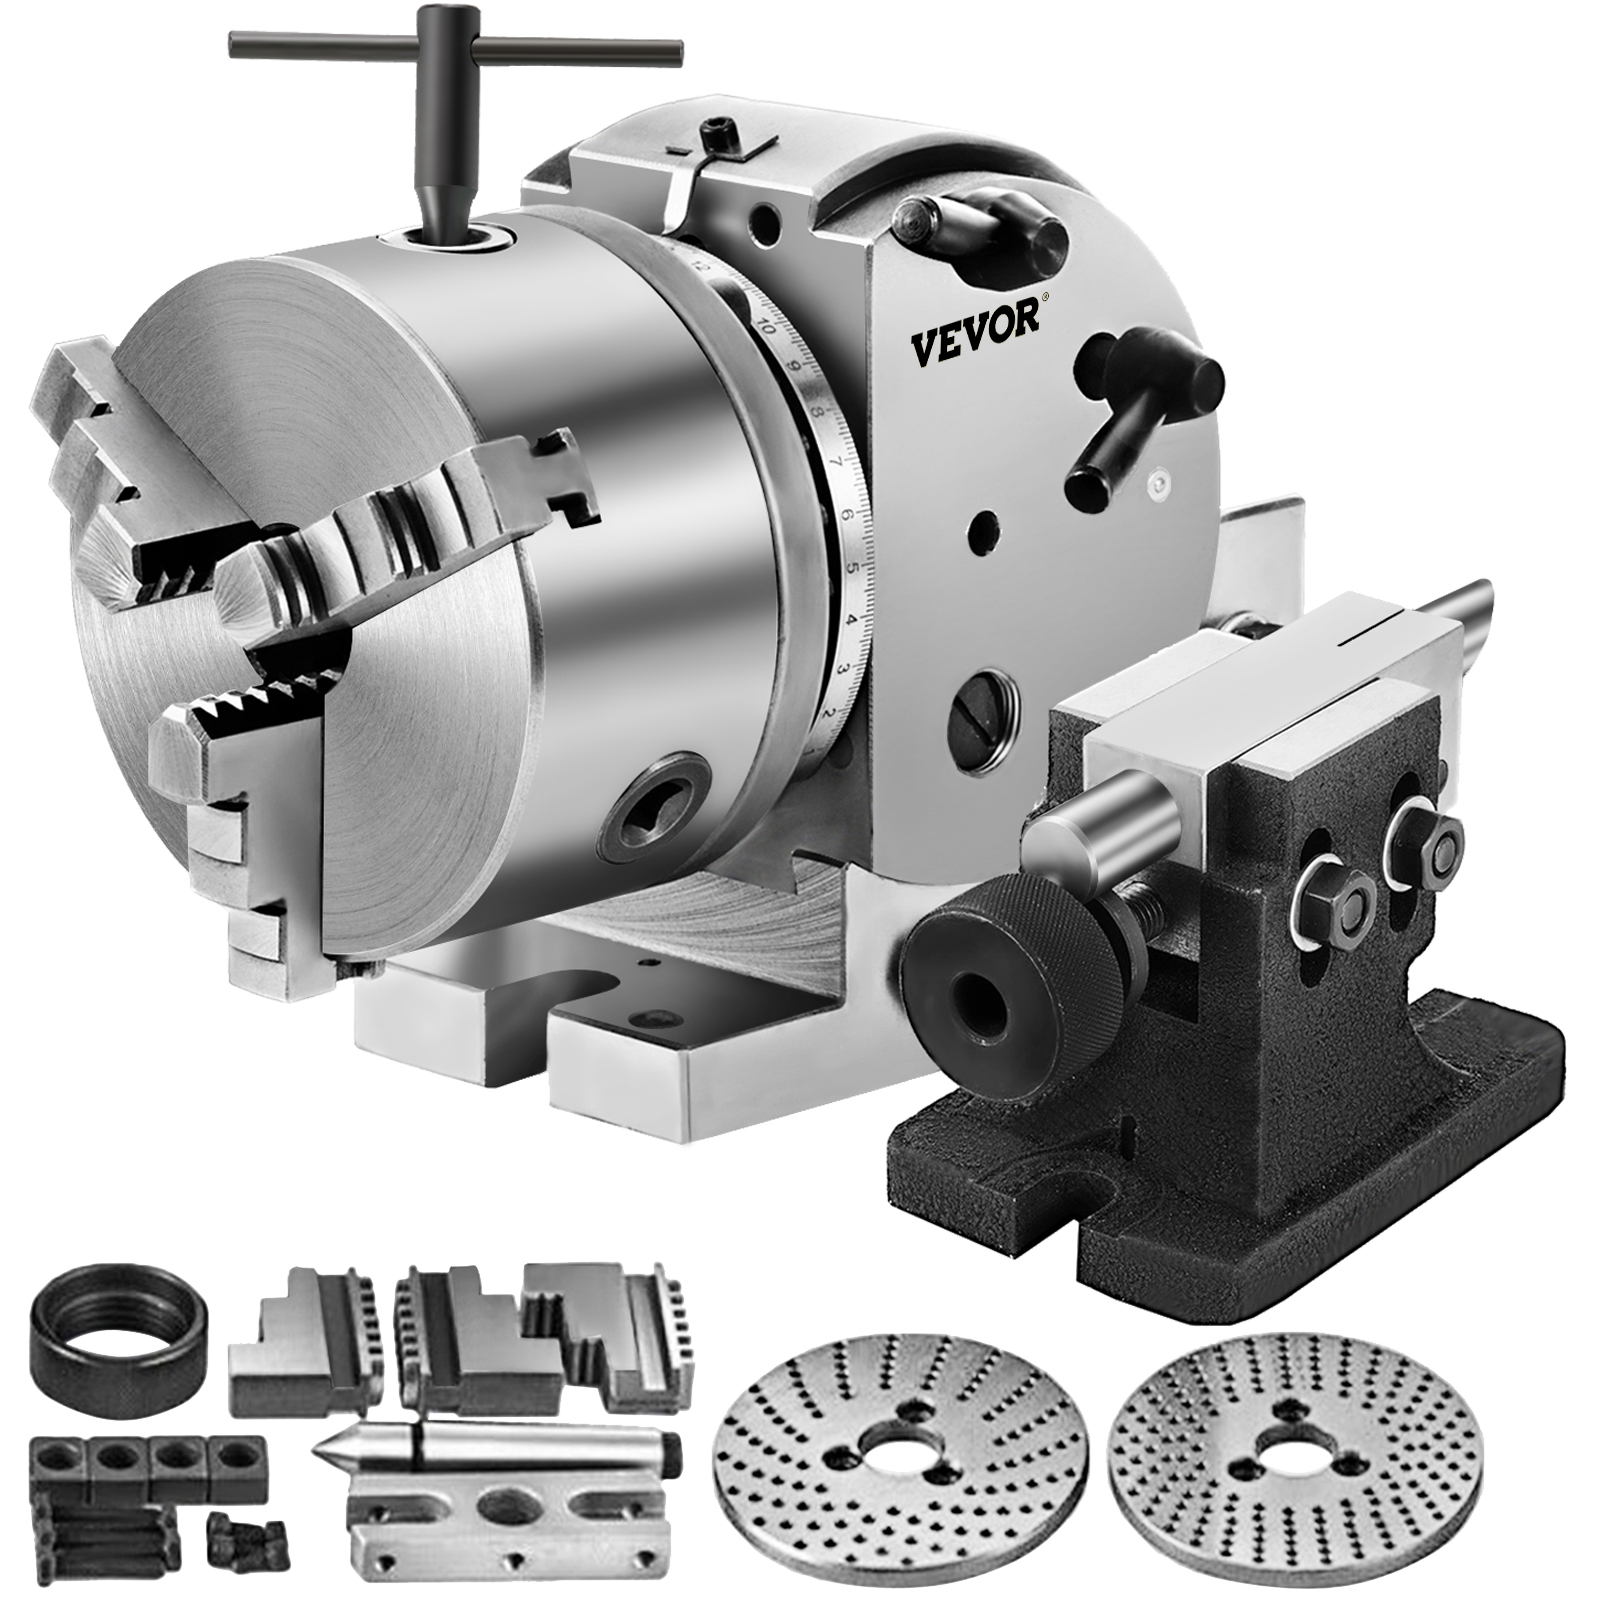 VEVOR BS-0 Precision Dividing Head with 5" 3-jaw Chuck &amp Tailstock for Milling от Vevor Many GEOs